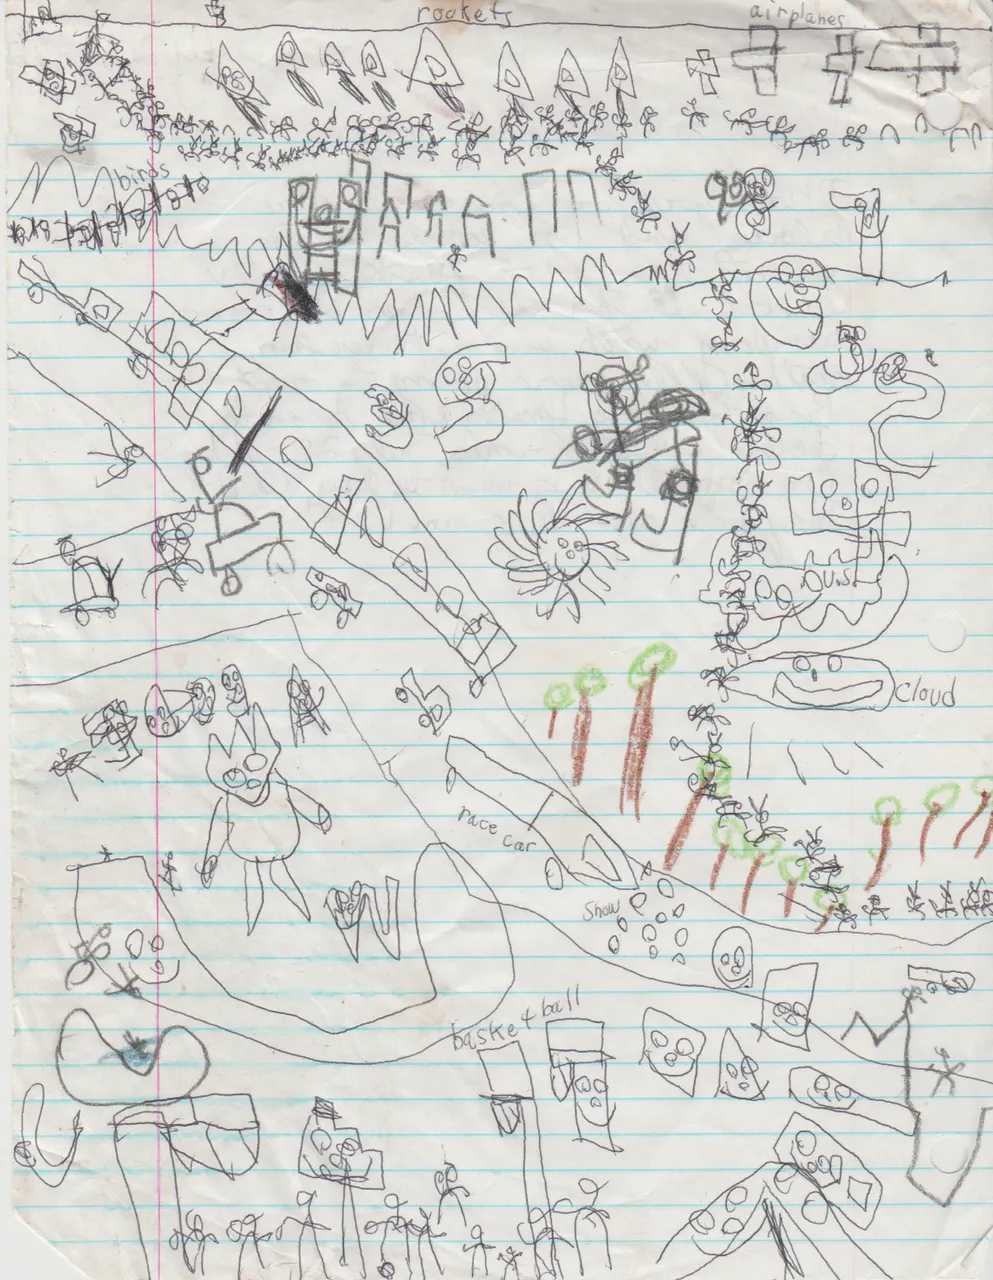 1992-07-20 - Katie's letter to grandpa Dick, grandma Skip - California July 25th to August 9th - Joey drawing on the back.jpg